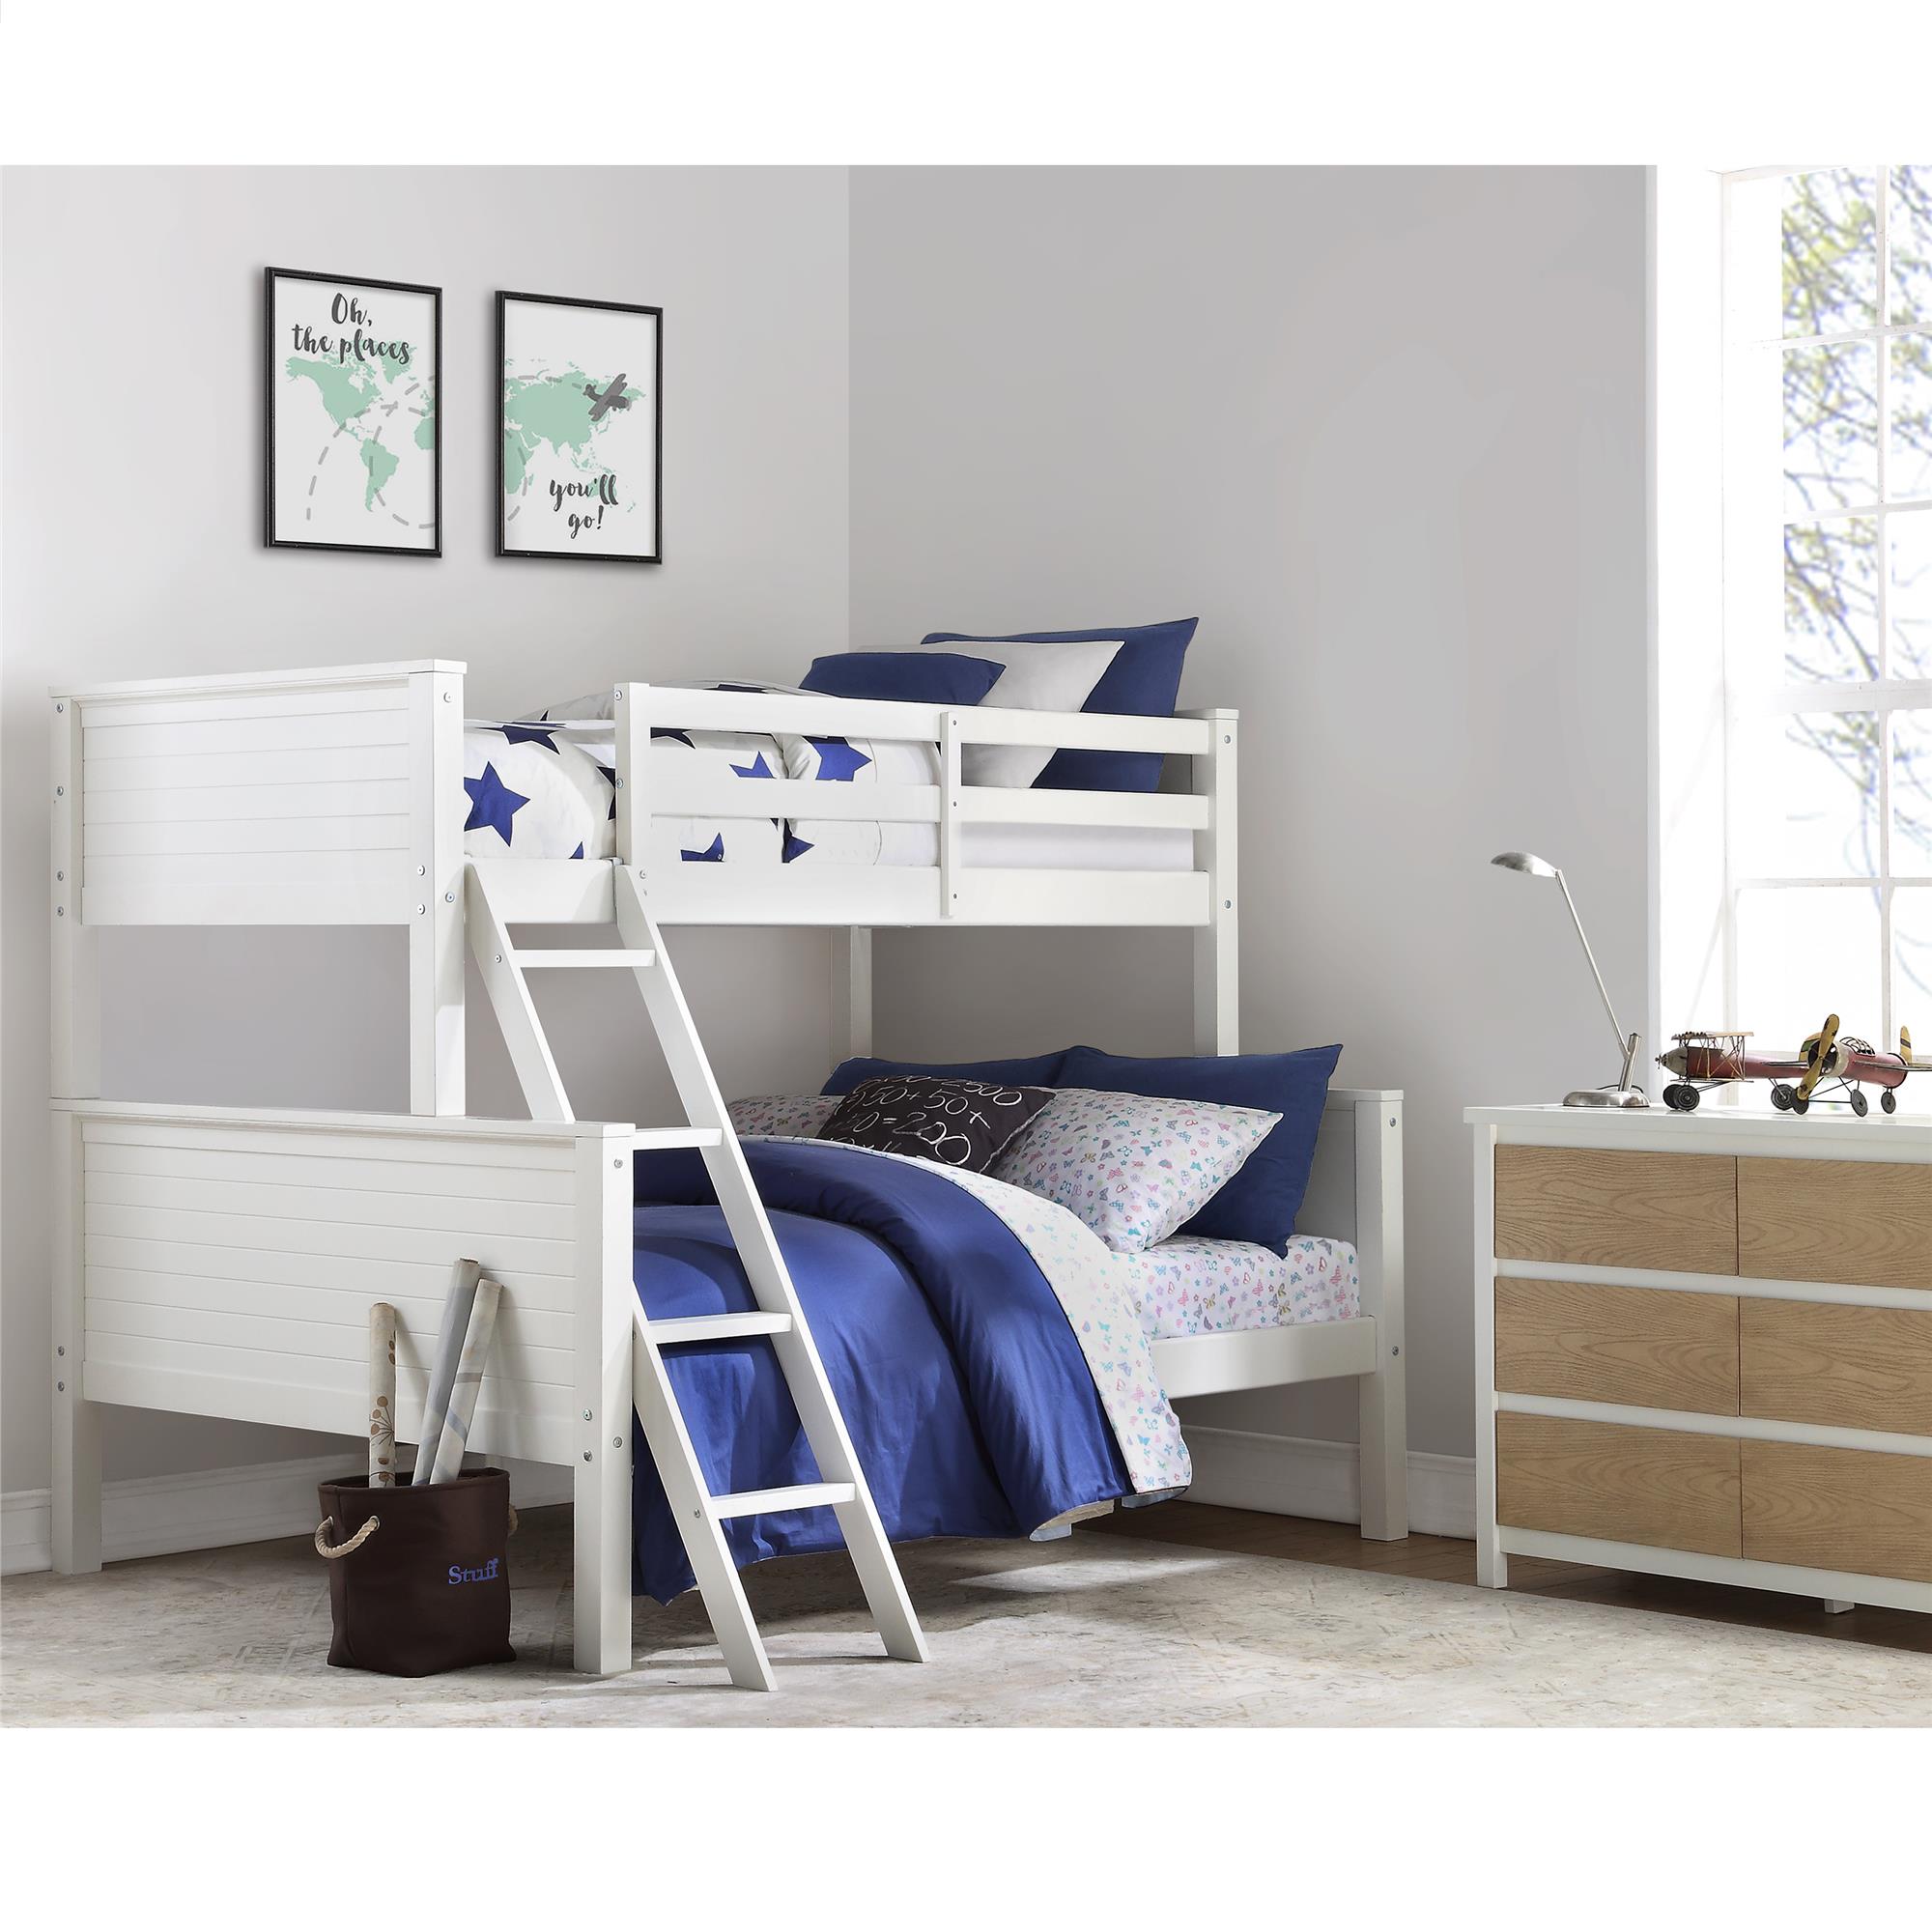 Mainstays Premium Twin Over Full Bunk Bed, Mainstays Premium Twin Over Full Metal Bunk Bed